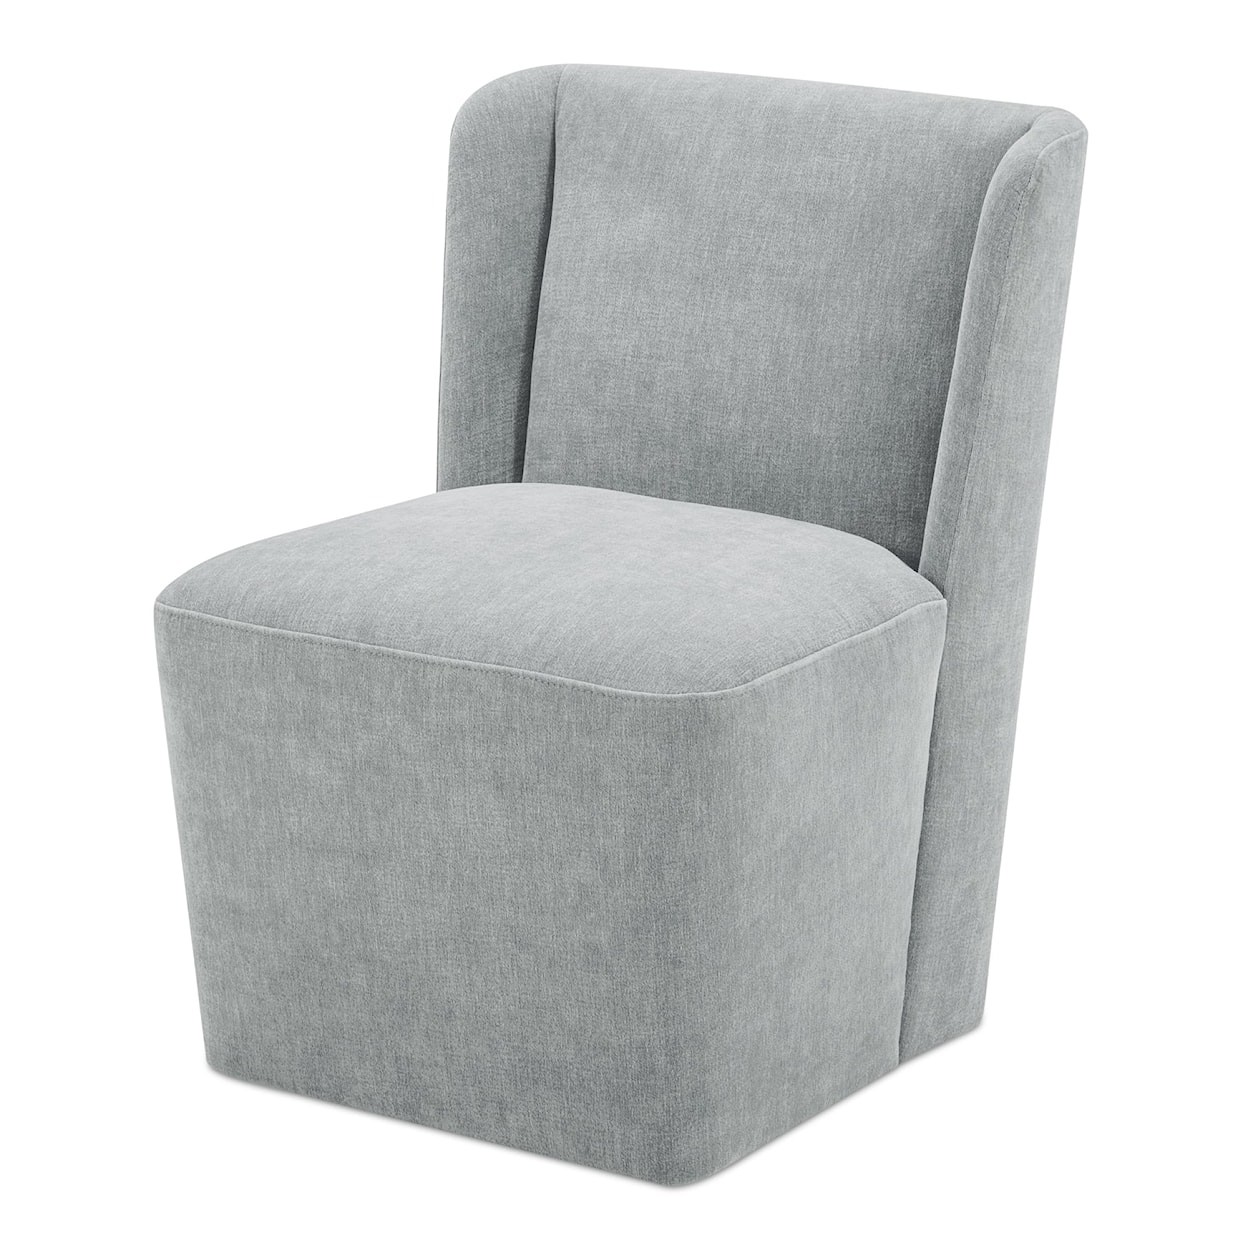 Moe's Home Collection Cormac Upholstered Dining Chair